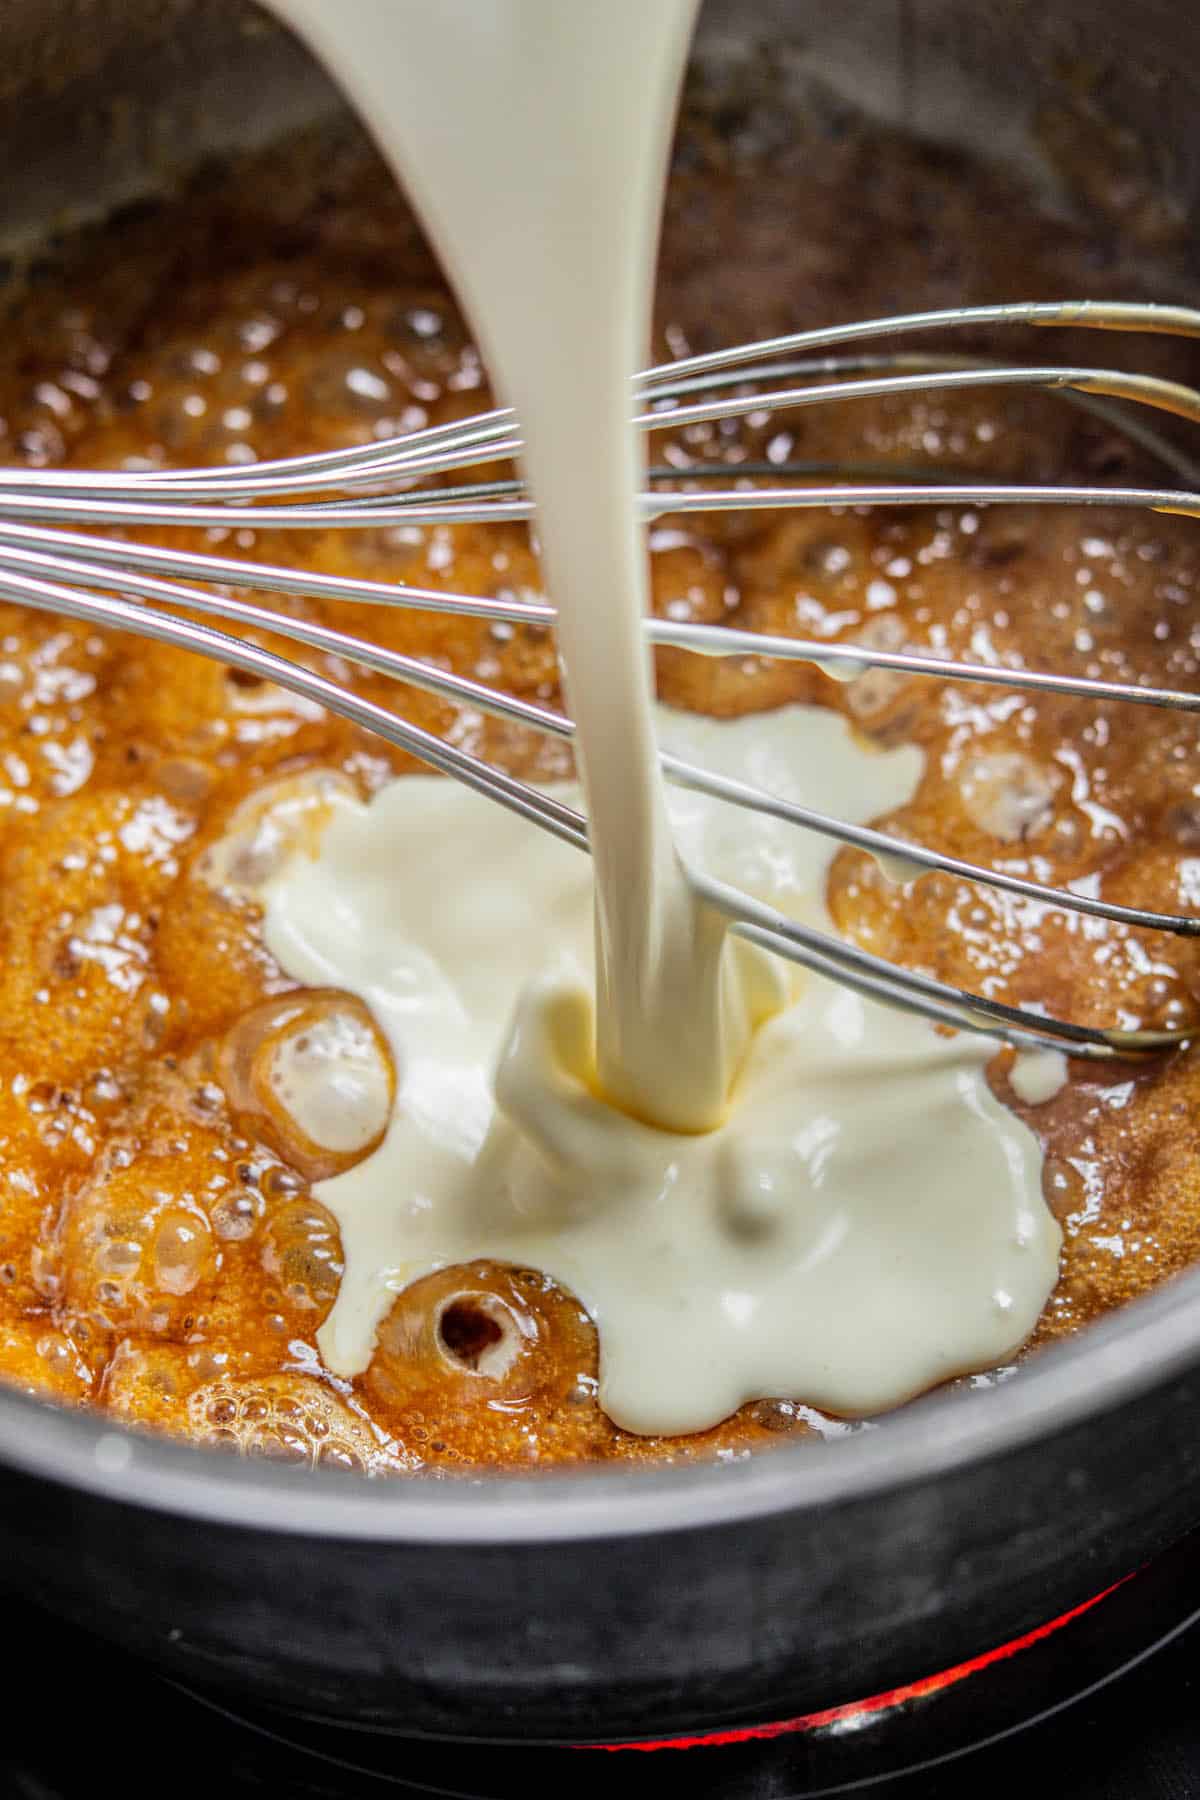 cream being poured into caramel.